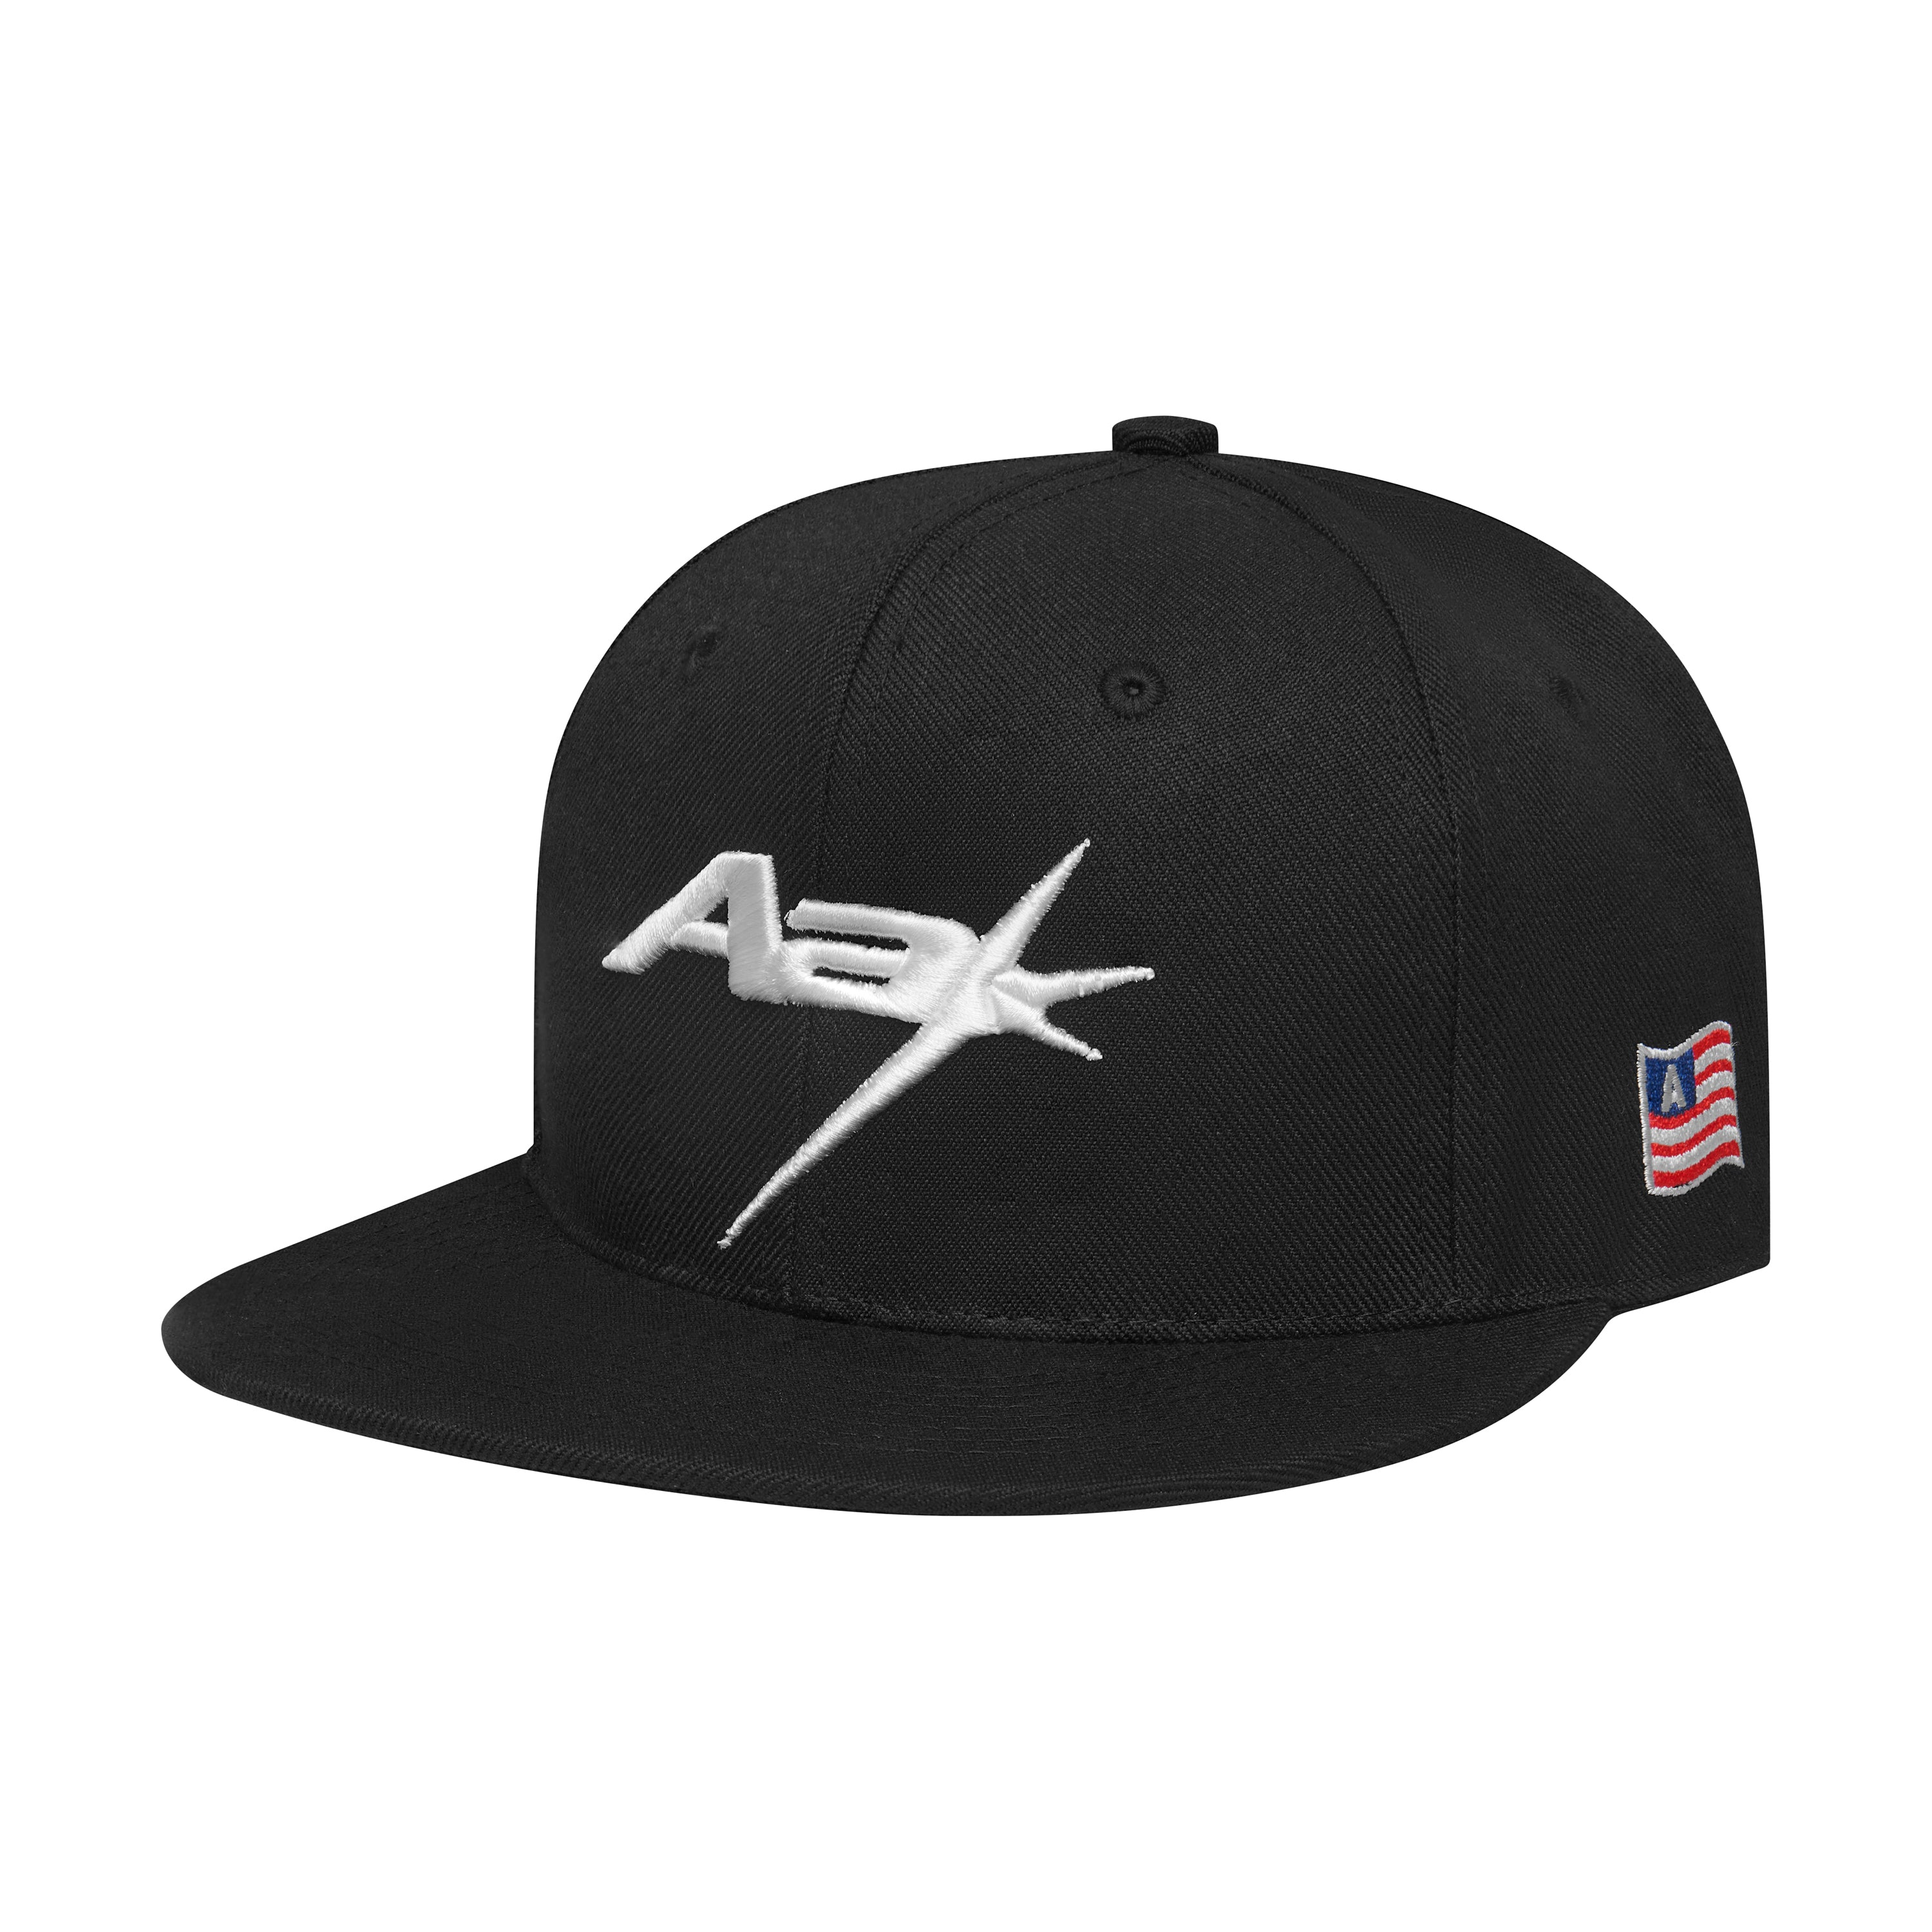 AA RACING LOGO FITTED - BLACK